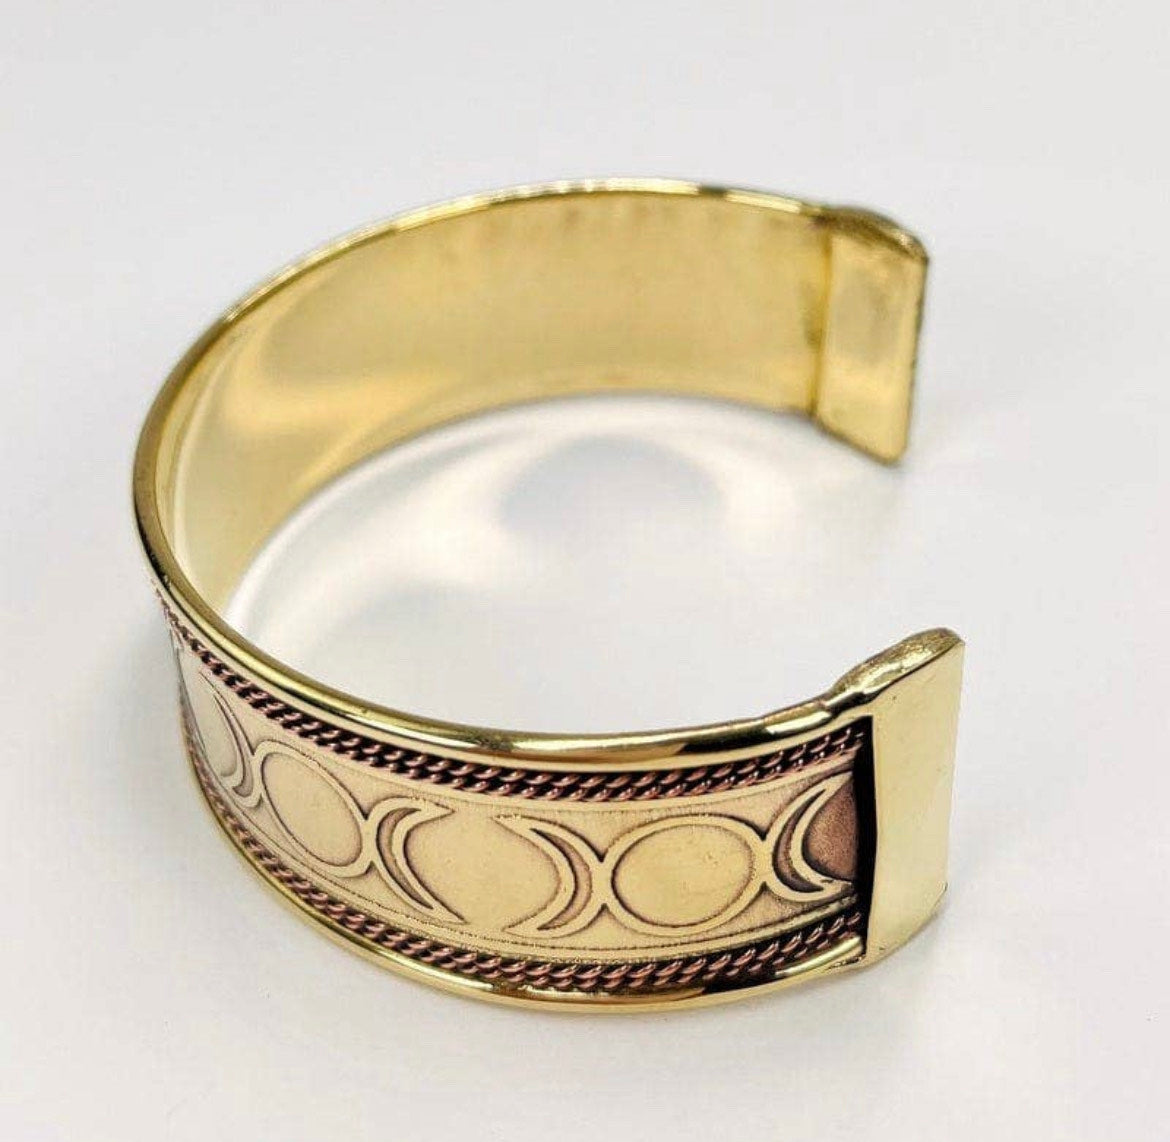 Brass Bracelet - Moon Phase and Copper Accent